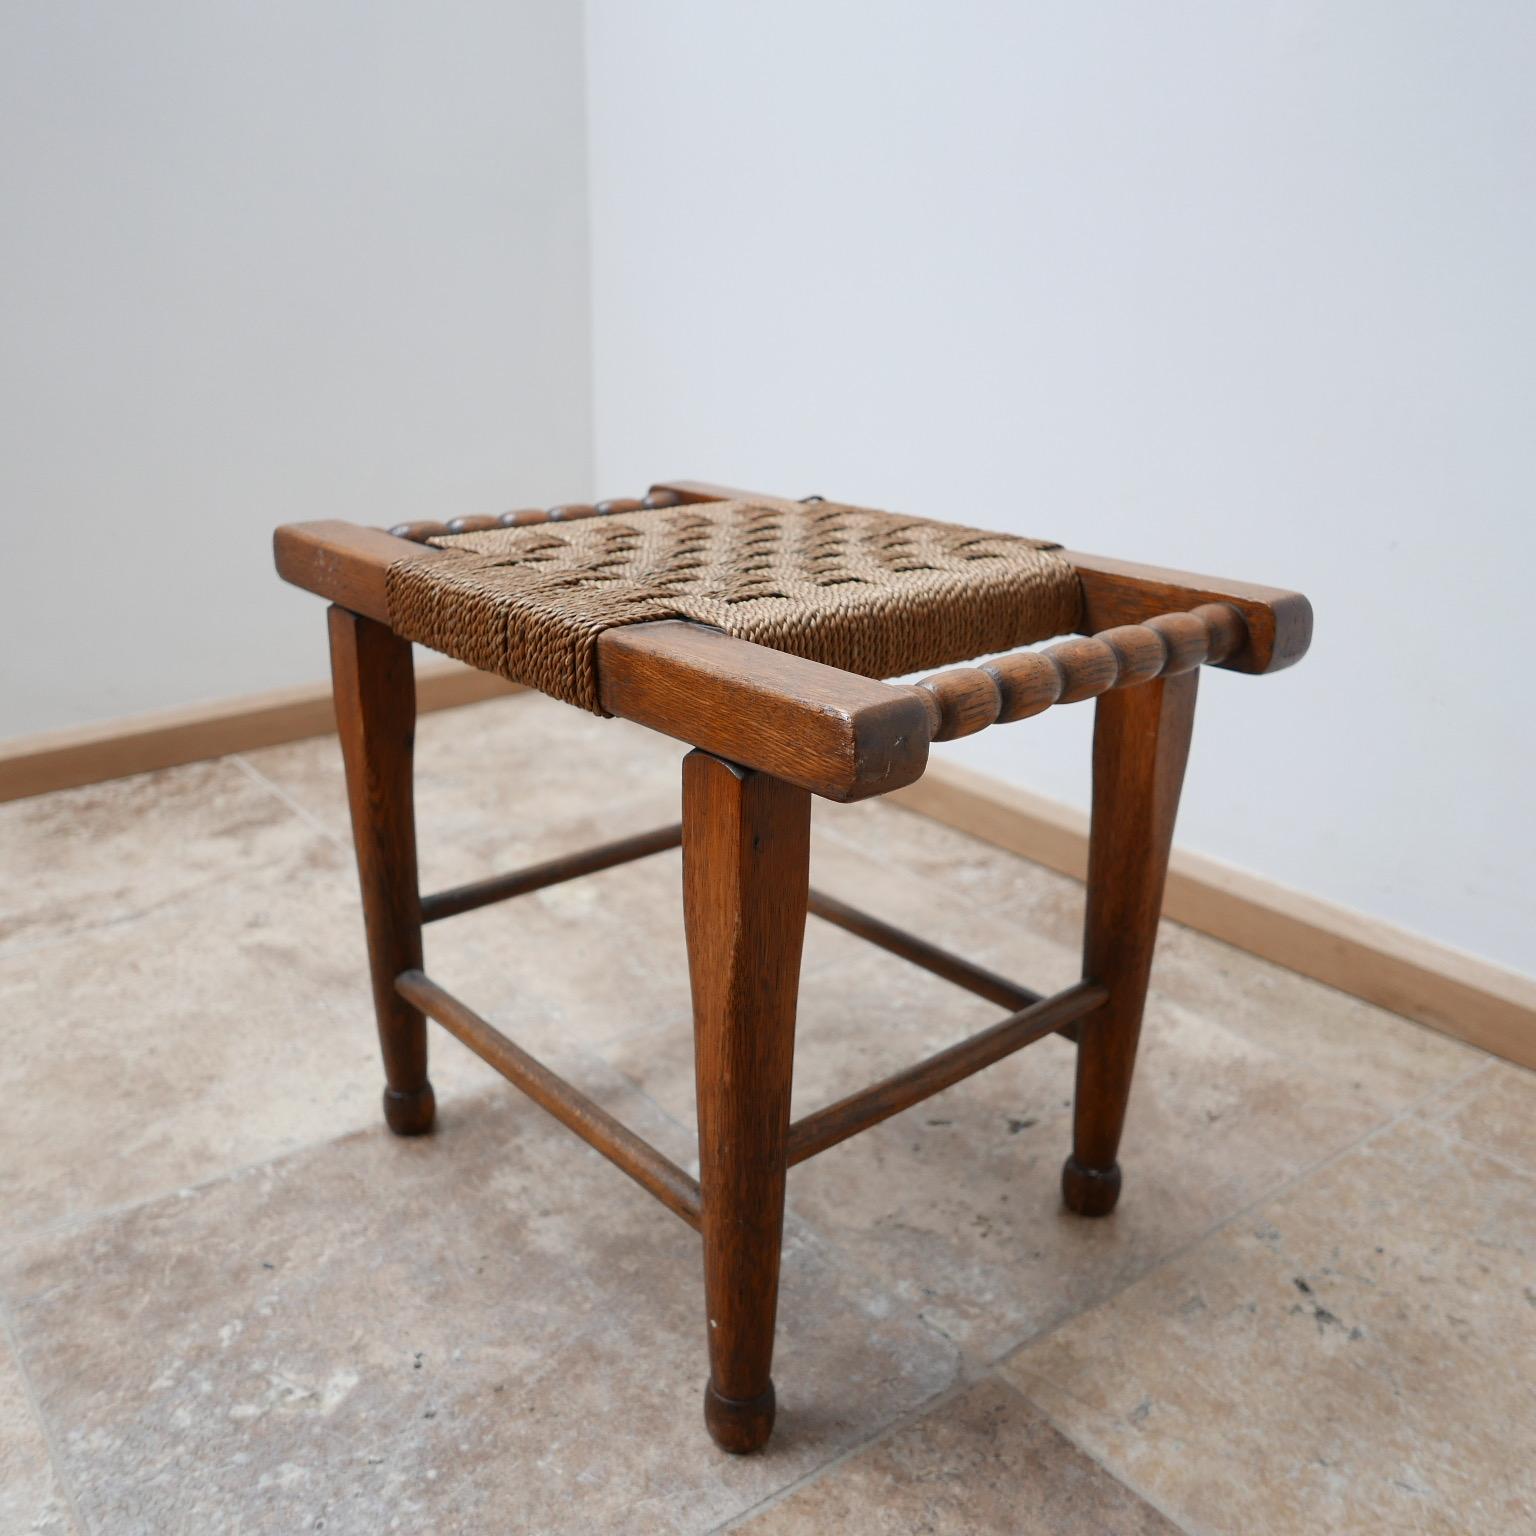 A good looking stool or side table.
England, circa 1950s.

Rope cord seat, two handles make it functional and stylish.

In good condition.

Dimensions: 51 width, 33 depth, 39.5 height, all in cm.